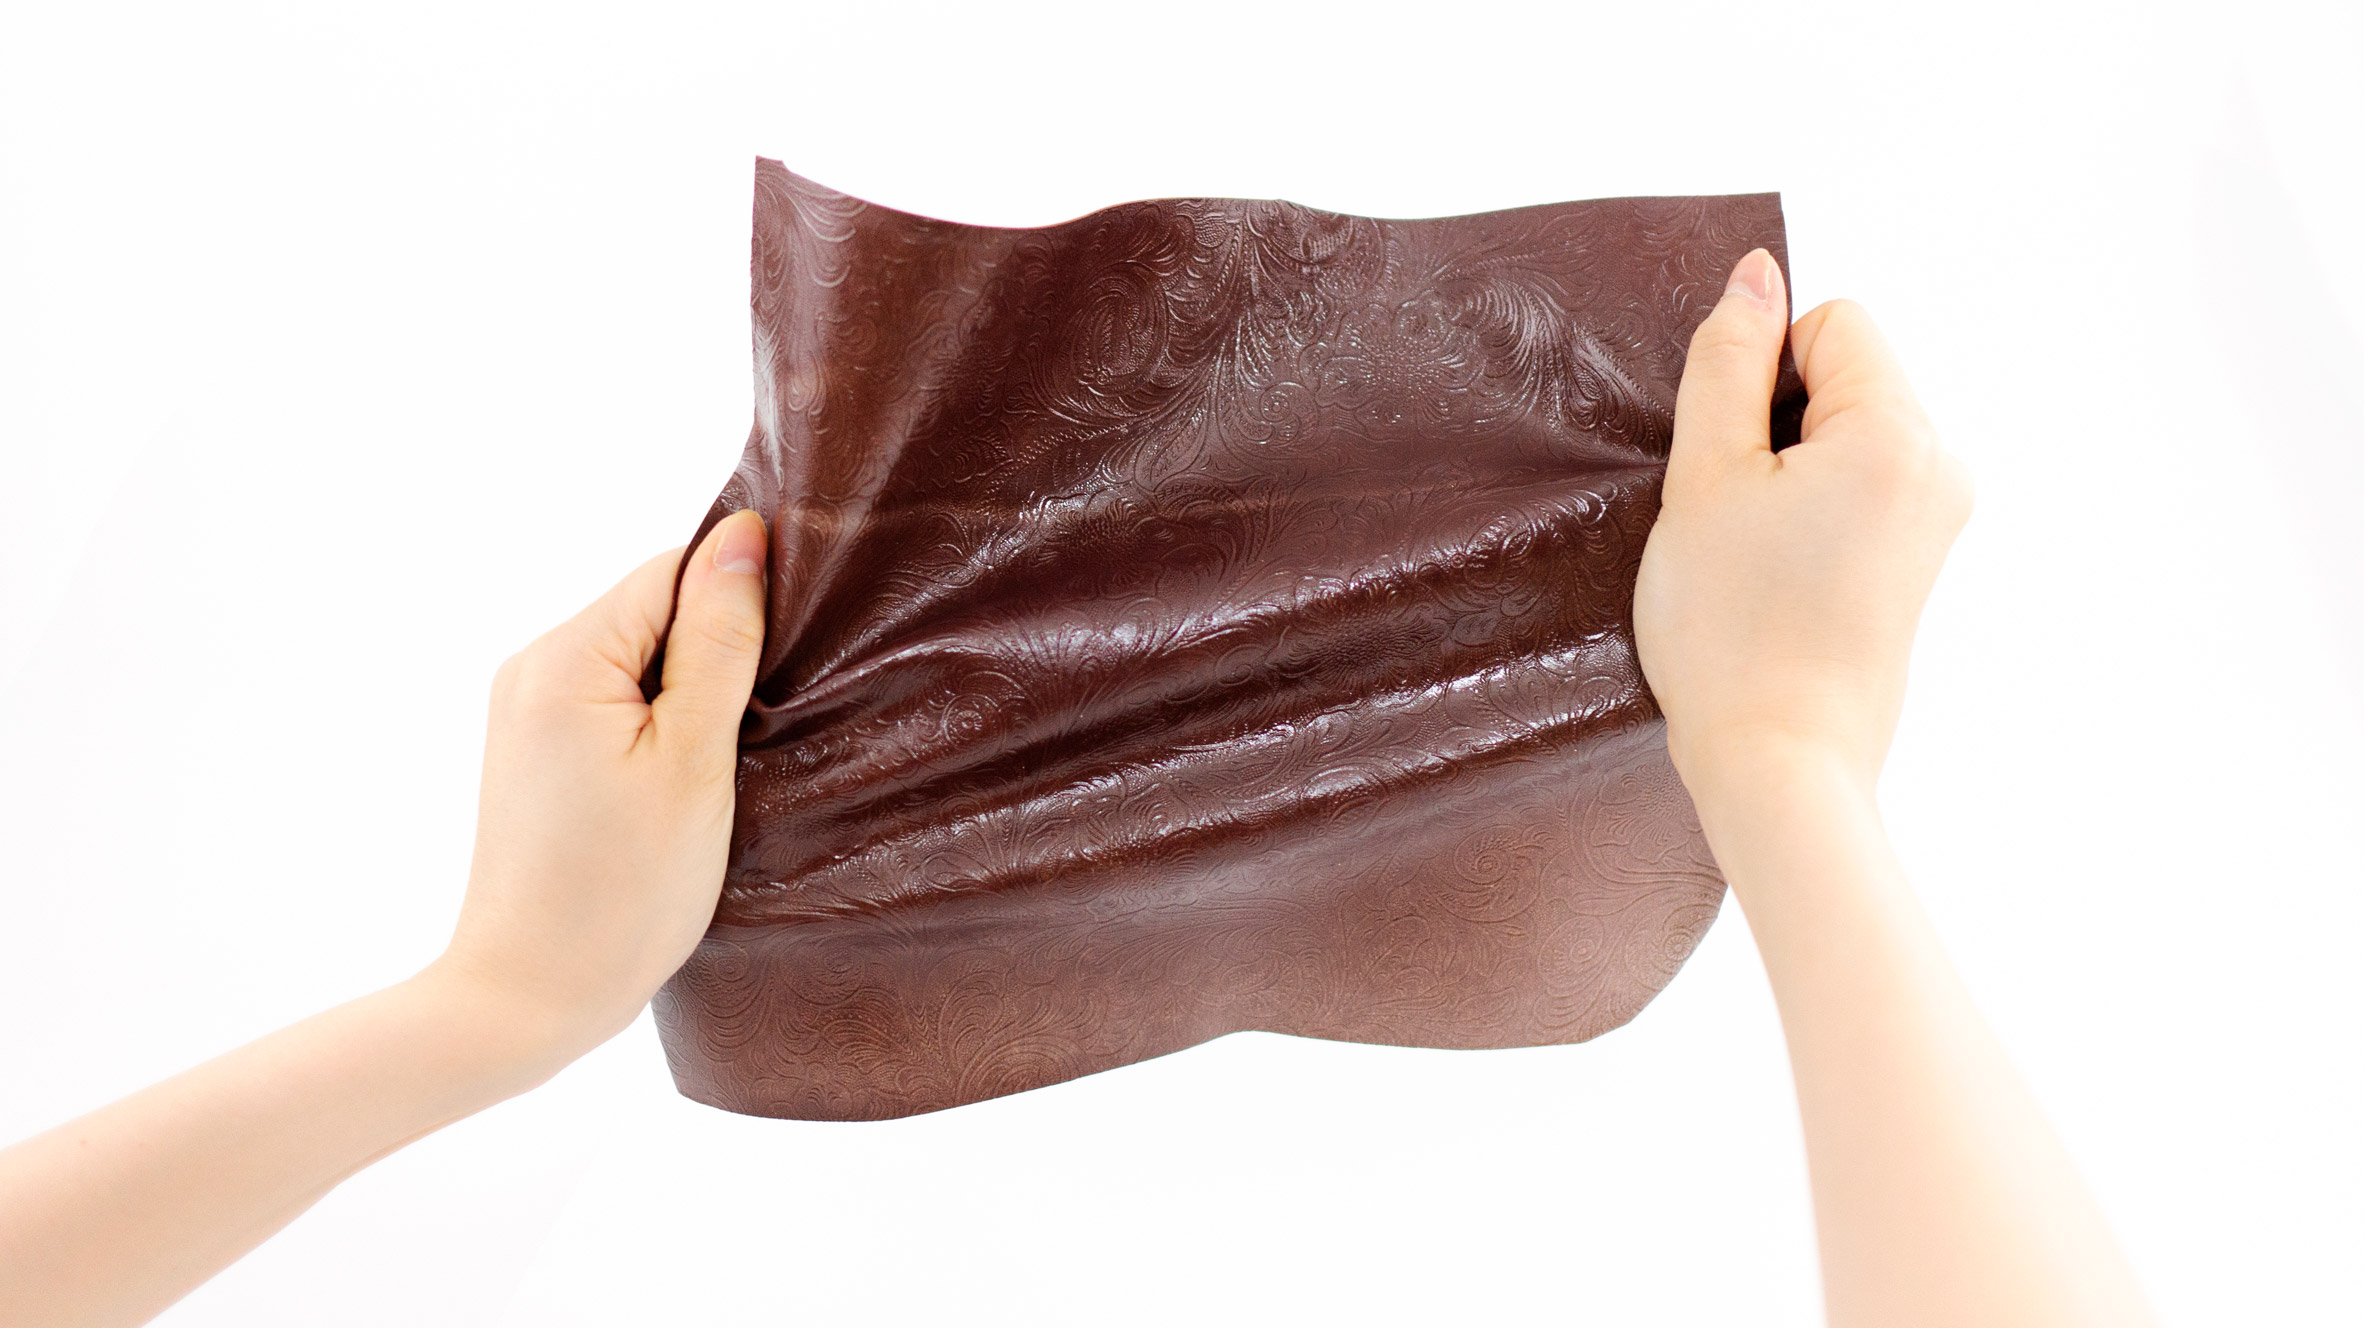 Tômtex is a leather alternative made from waste